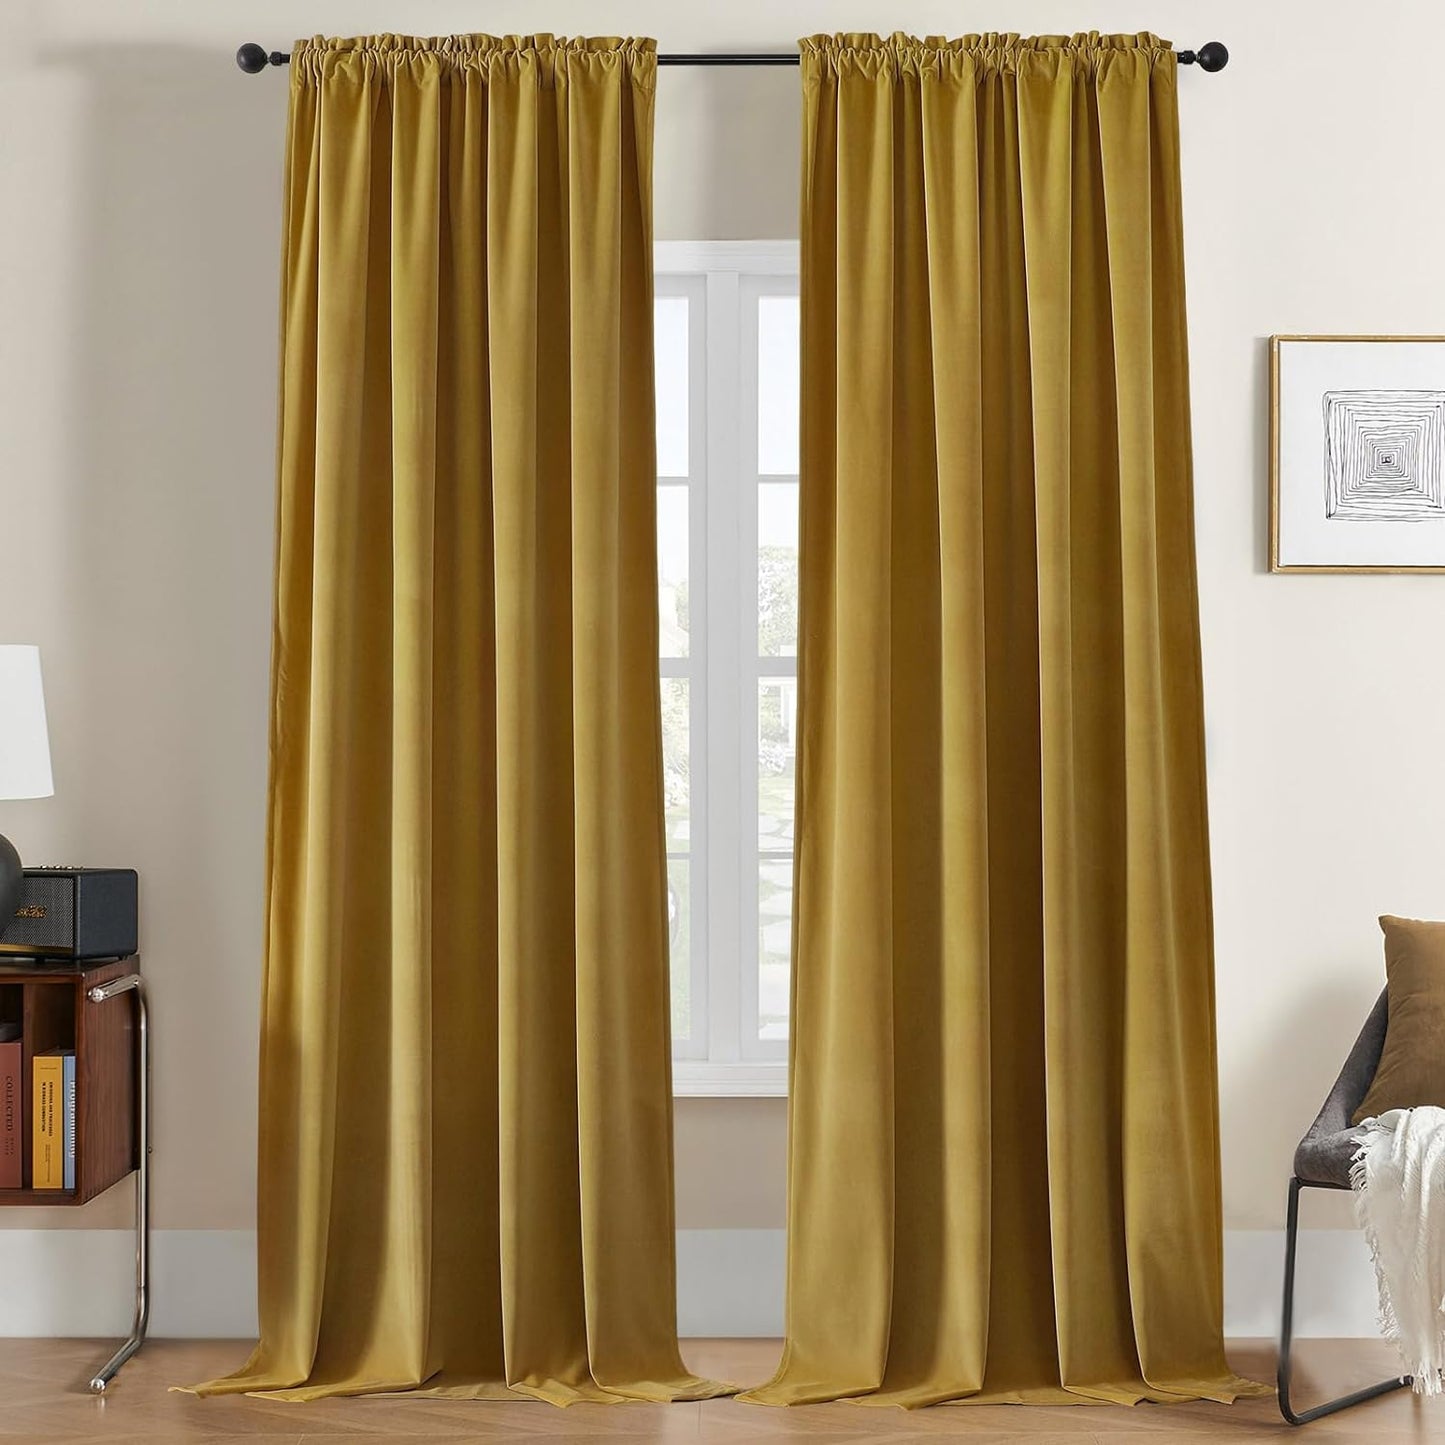 Joydeco Black Velvet Curtains 90 Inch Length 2 Panels, Luxury Blackout Rod Pocket Thermal Insulated Window Curtains, Super Soft Room Darkening Drapes for Living Dining Room Bedroom,W52 X L90 Inches  Joydeco Rod Pocket | Golden Brown 52W X 84L Inch X 2 Panels 